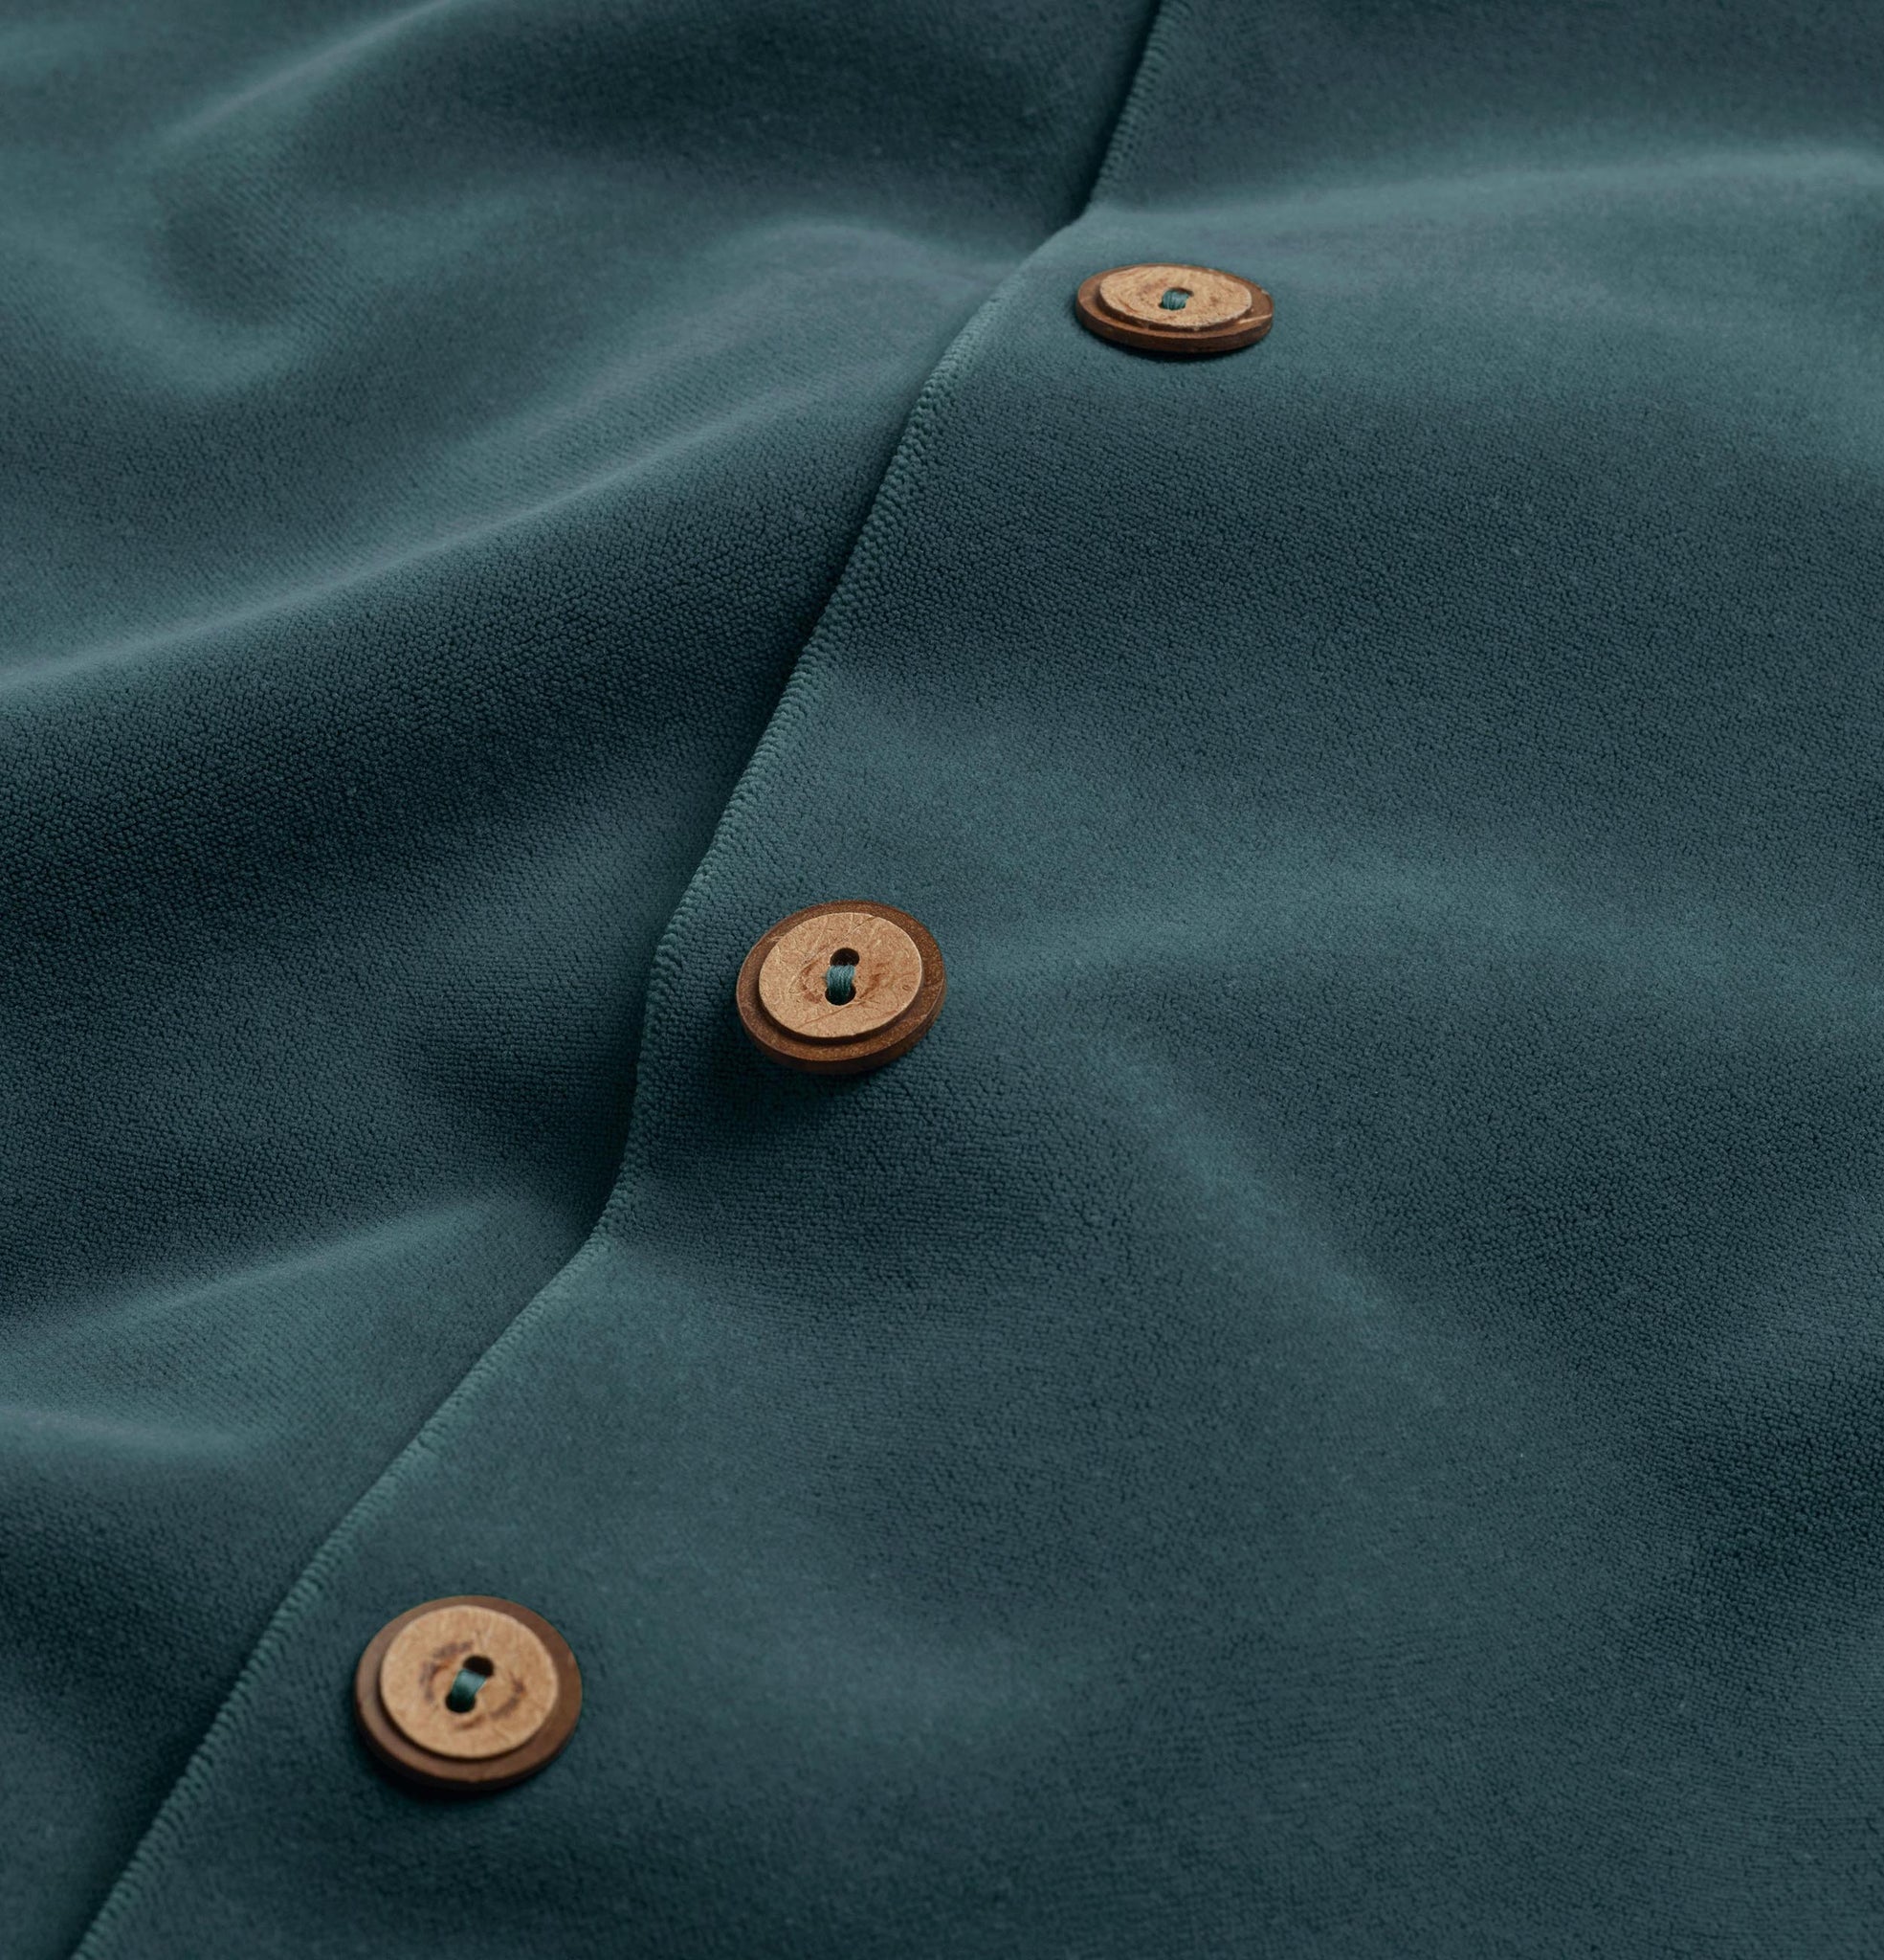 Button detail of icy teal velvet cushion